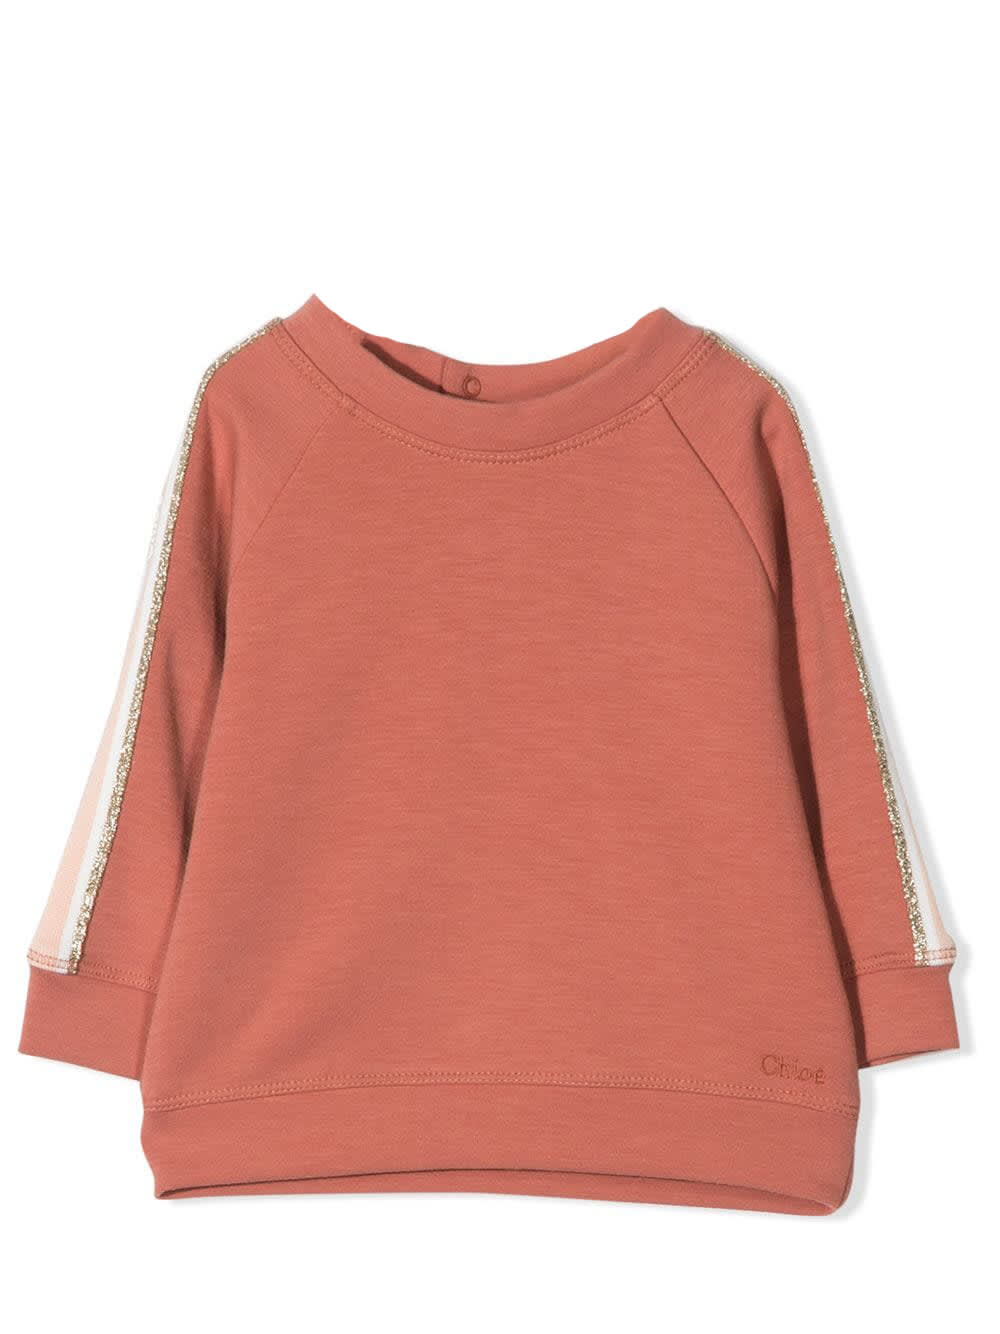 Chloé Sweatshirt With Embroidery